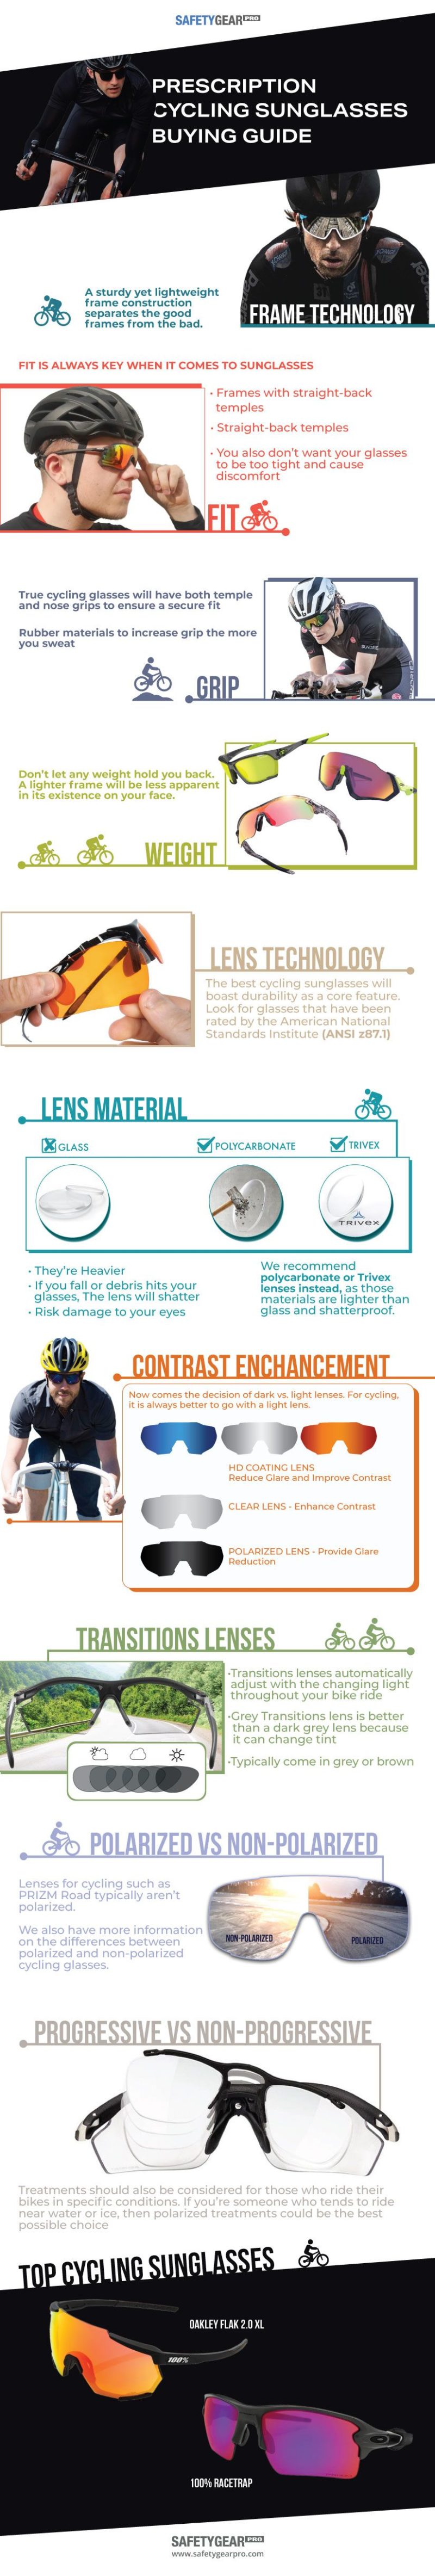 prescription cycling sunglasses buying guide infographic